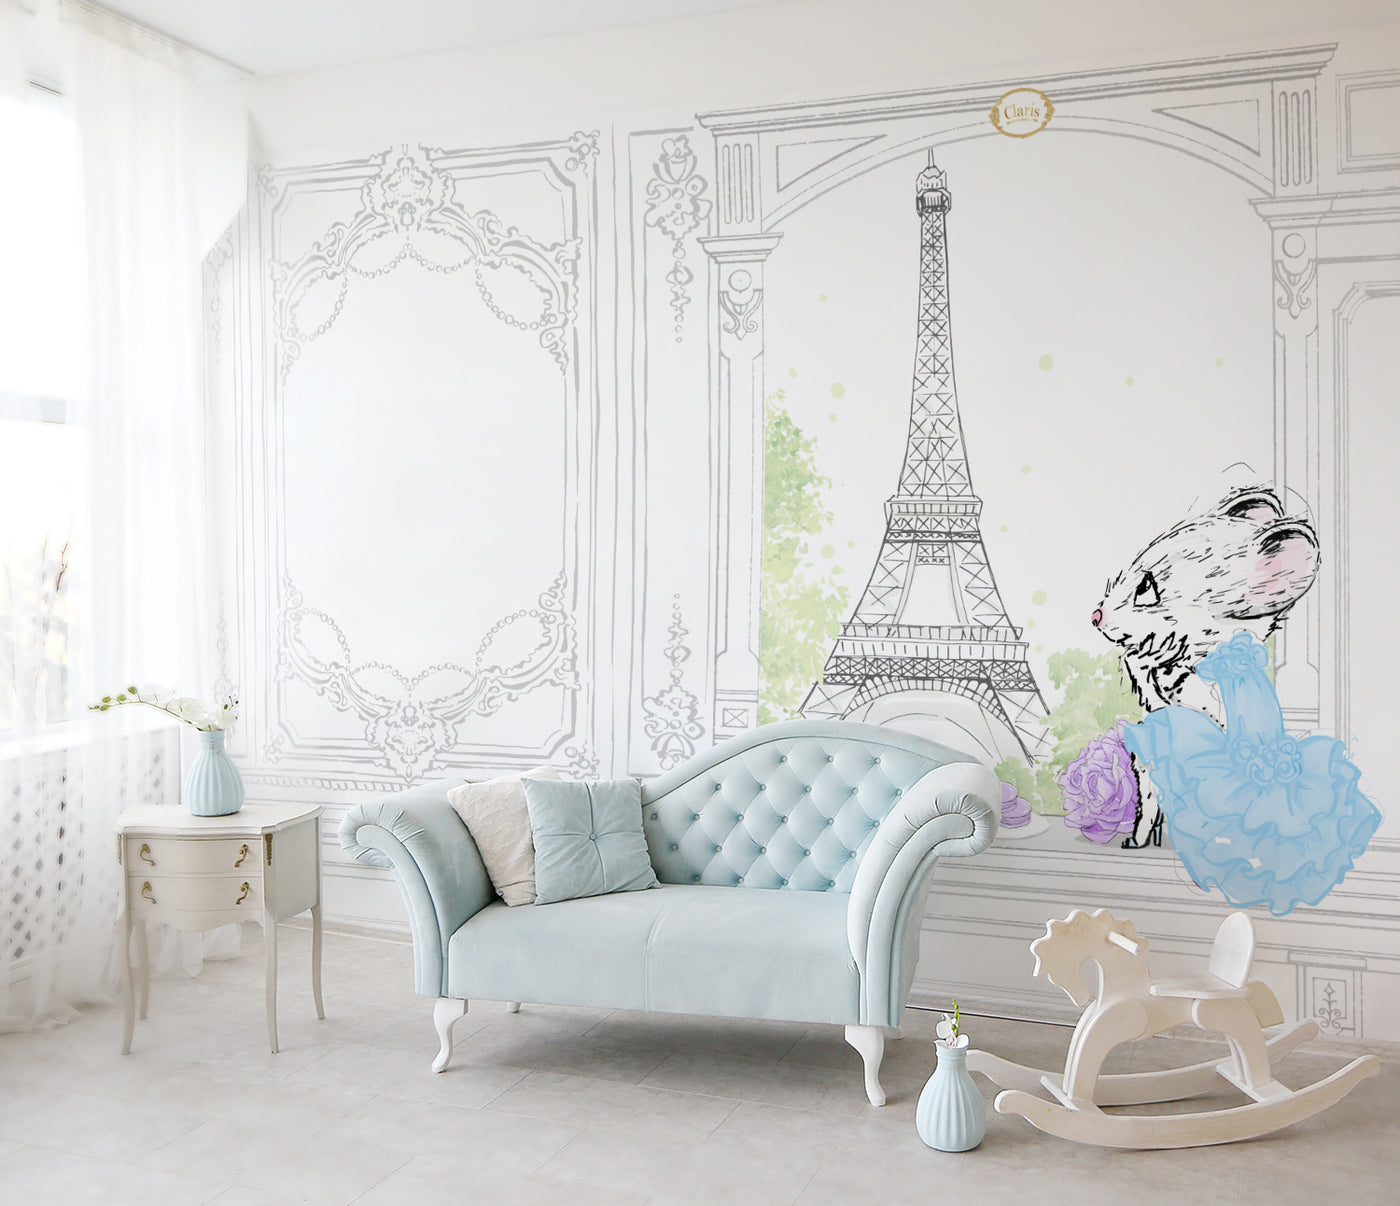 The,Interior,Is,Decorated,In,Pastel,Blue,Tones,With,A